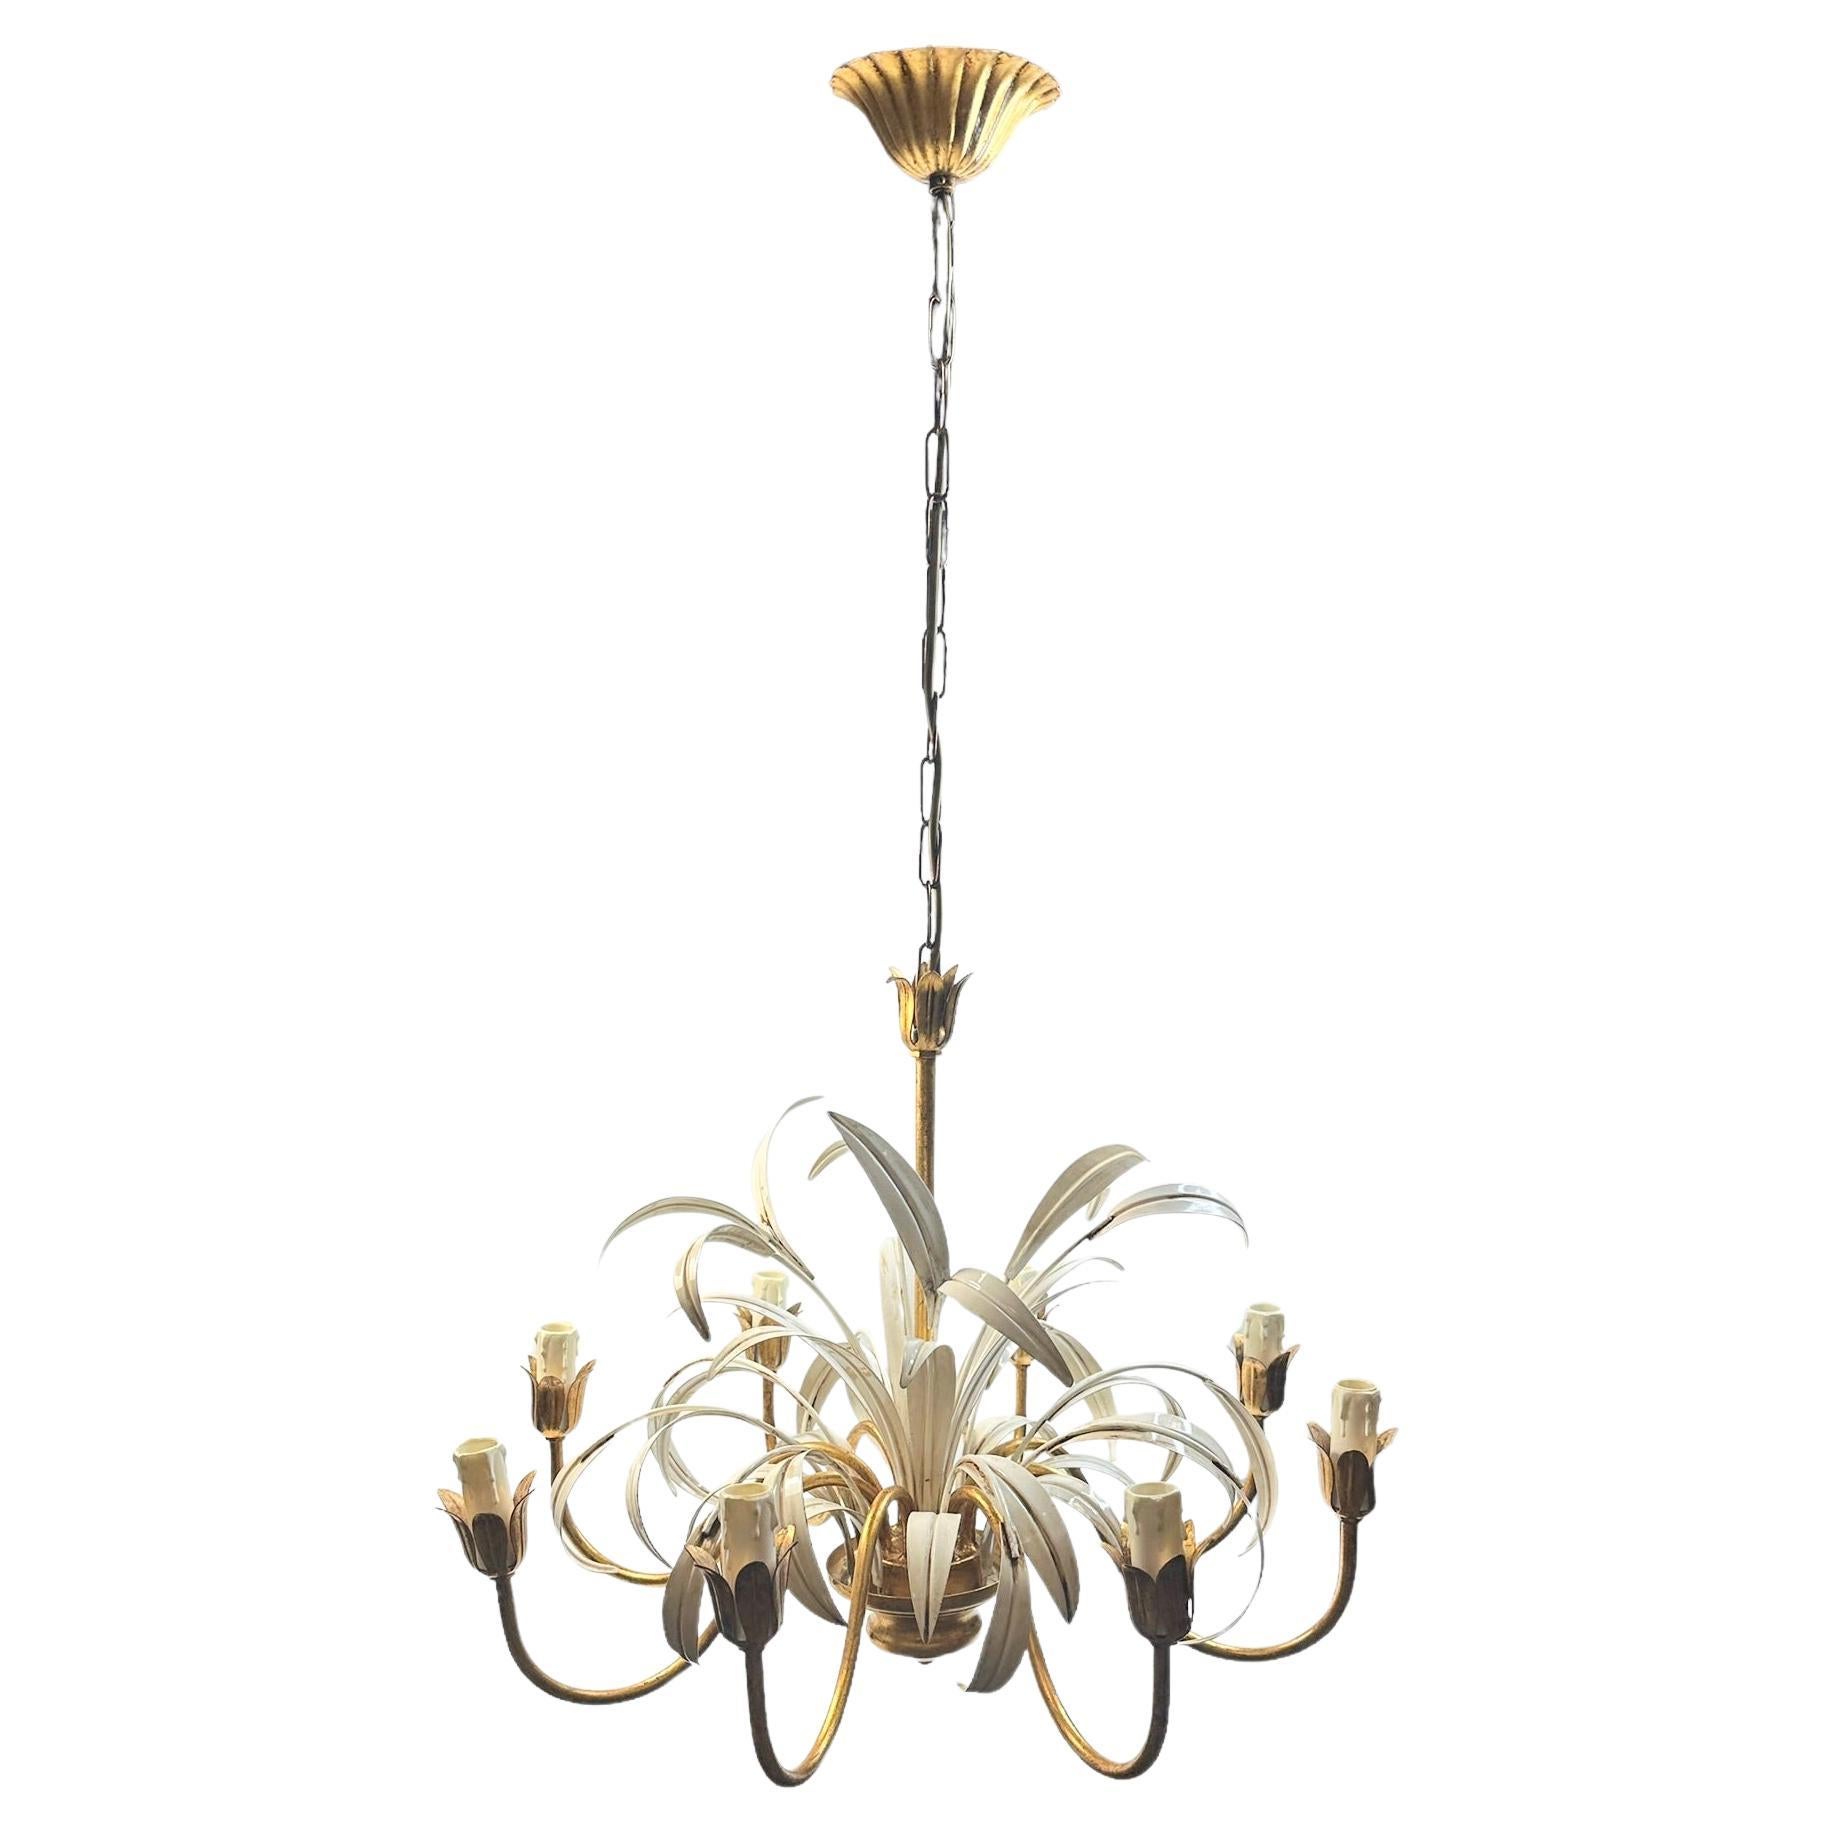 8-Light Gilt Metal Reed Leaf Chandelier Tole Toleware Coco Chanel Style, Italy For Sale